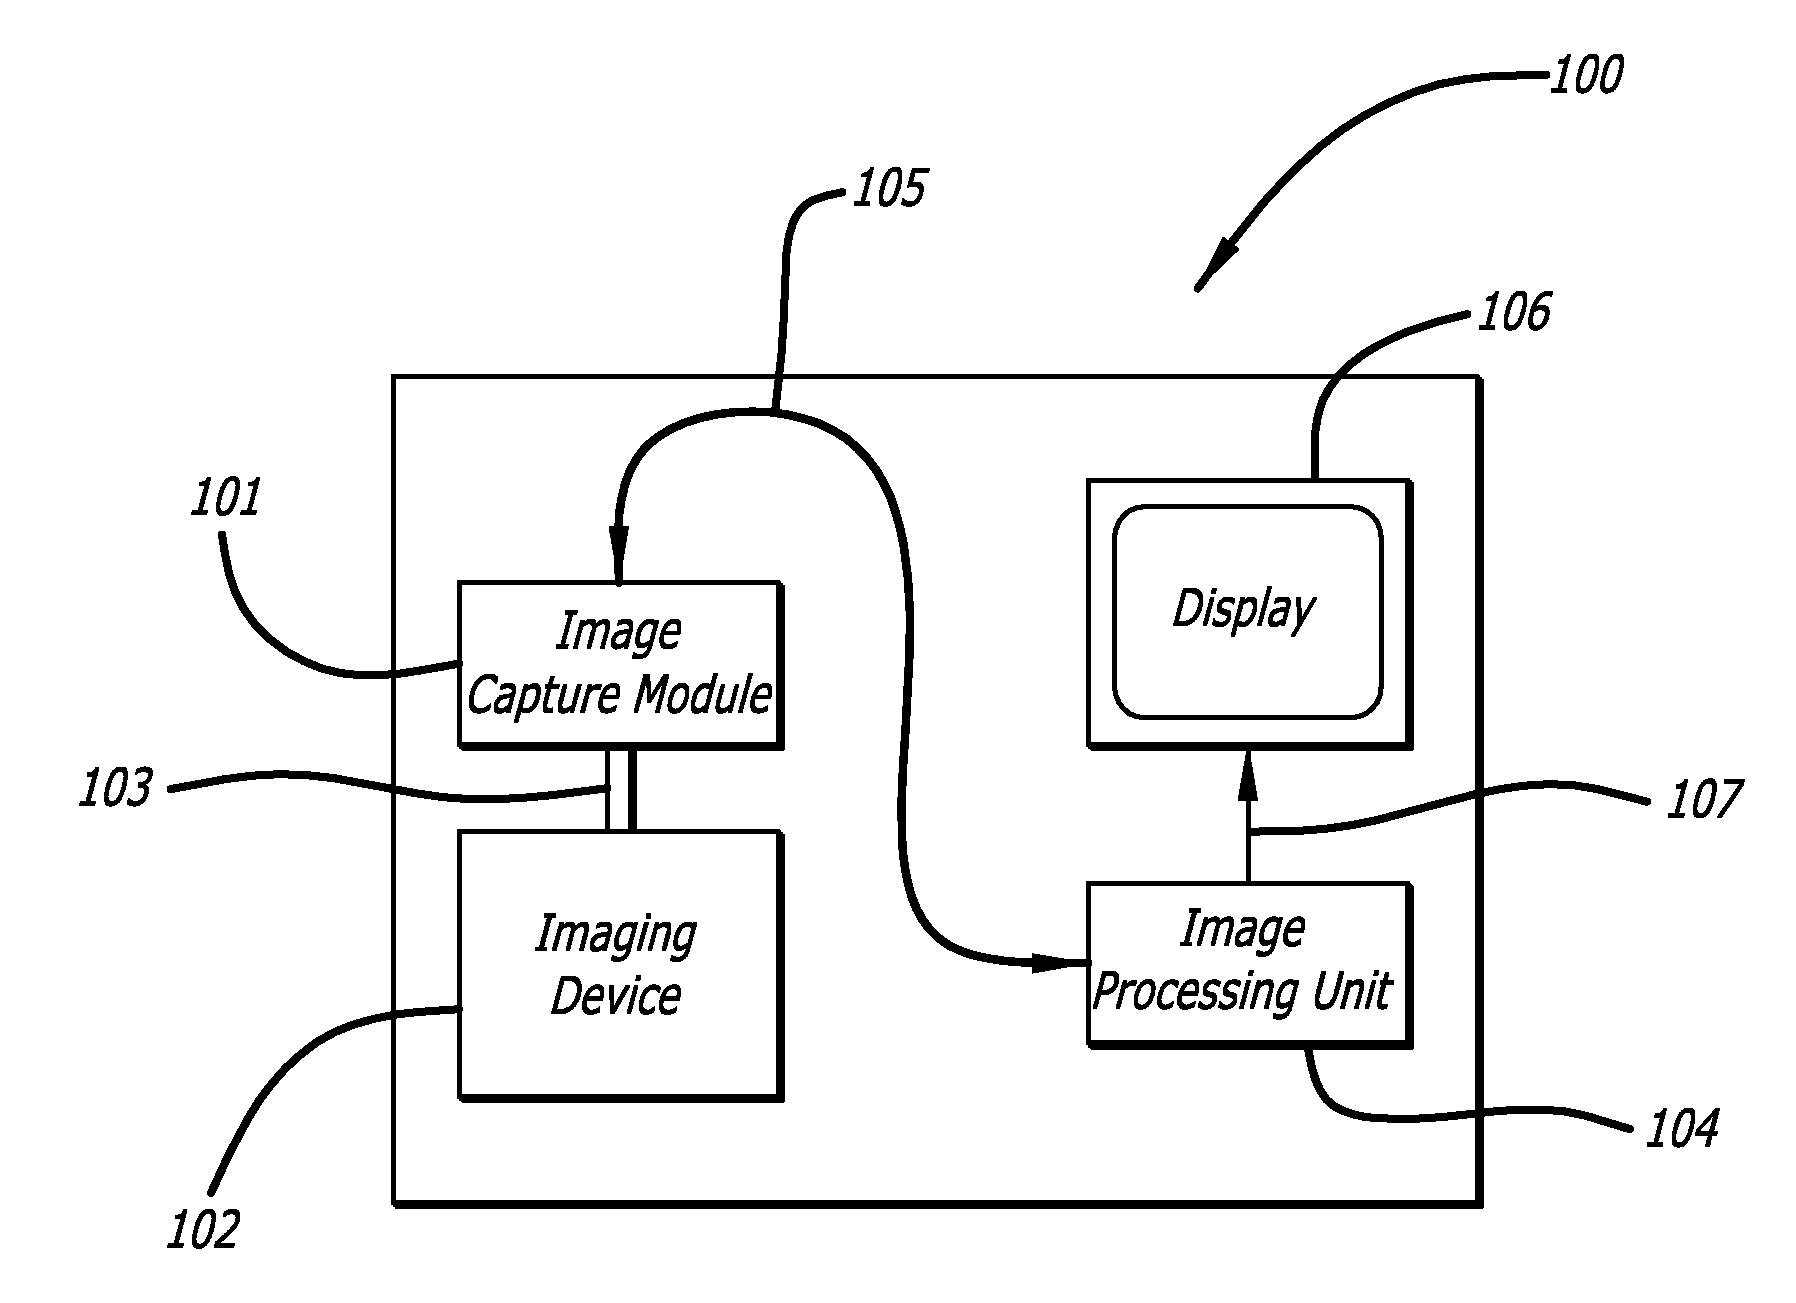 Real-time surgical reference indicium apparatus and methods for surgical applications